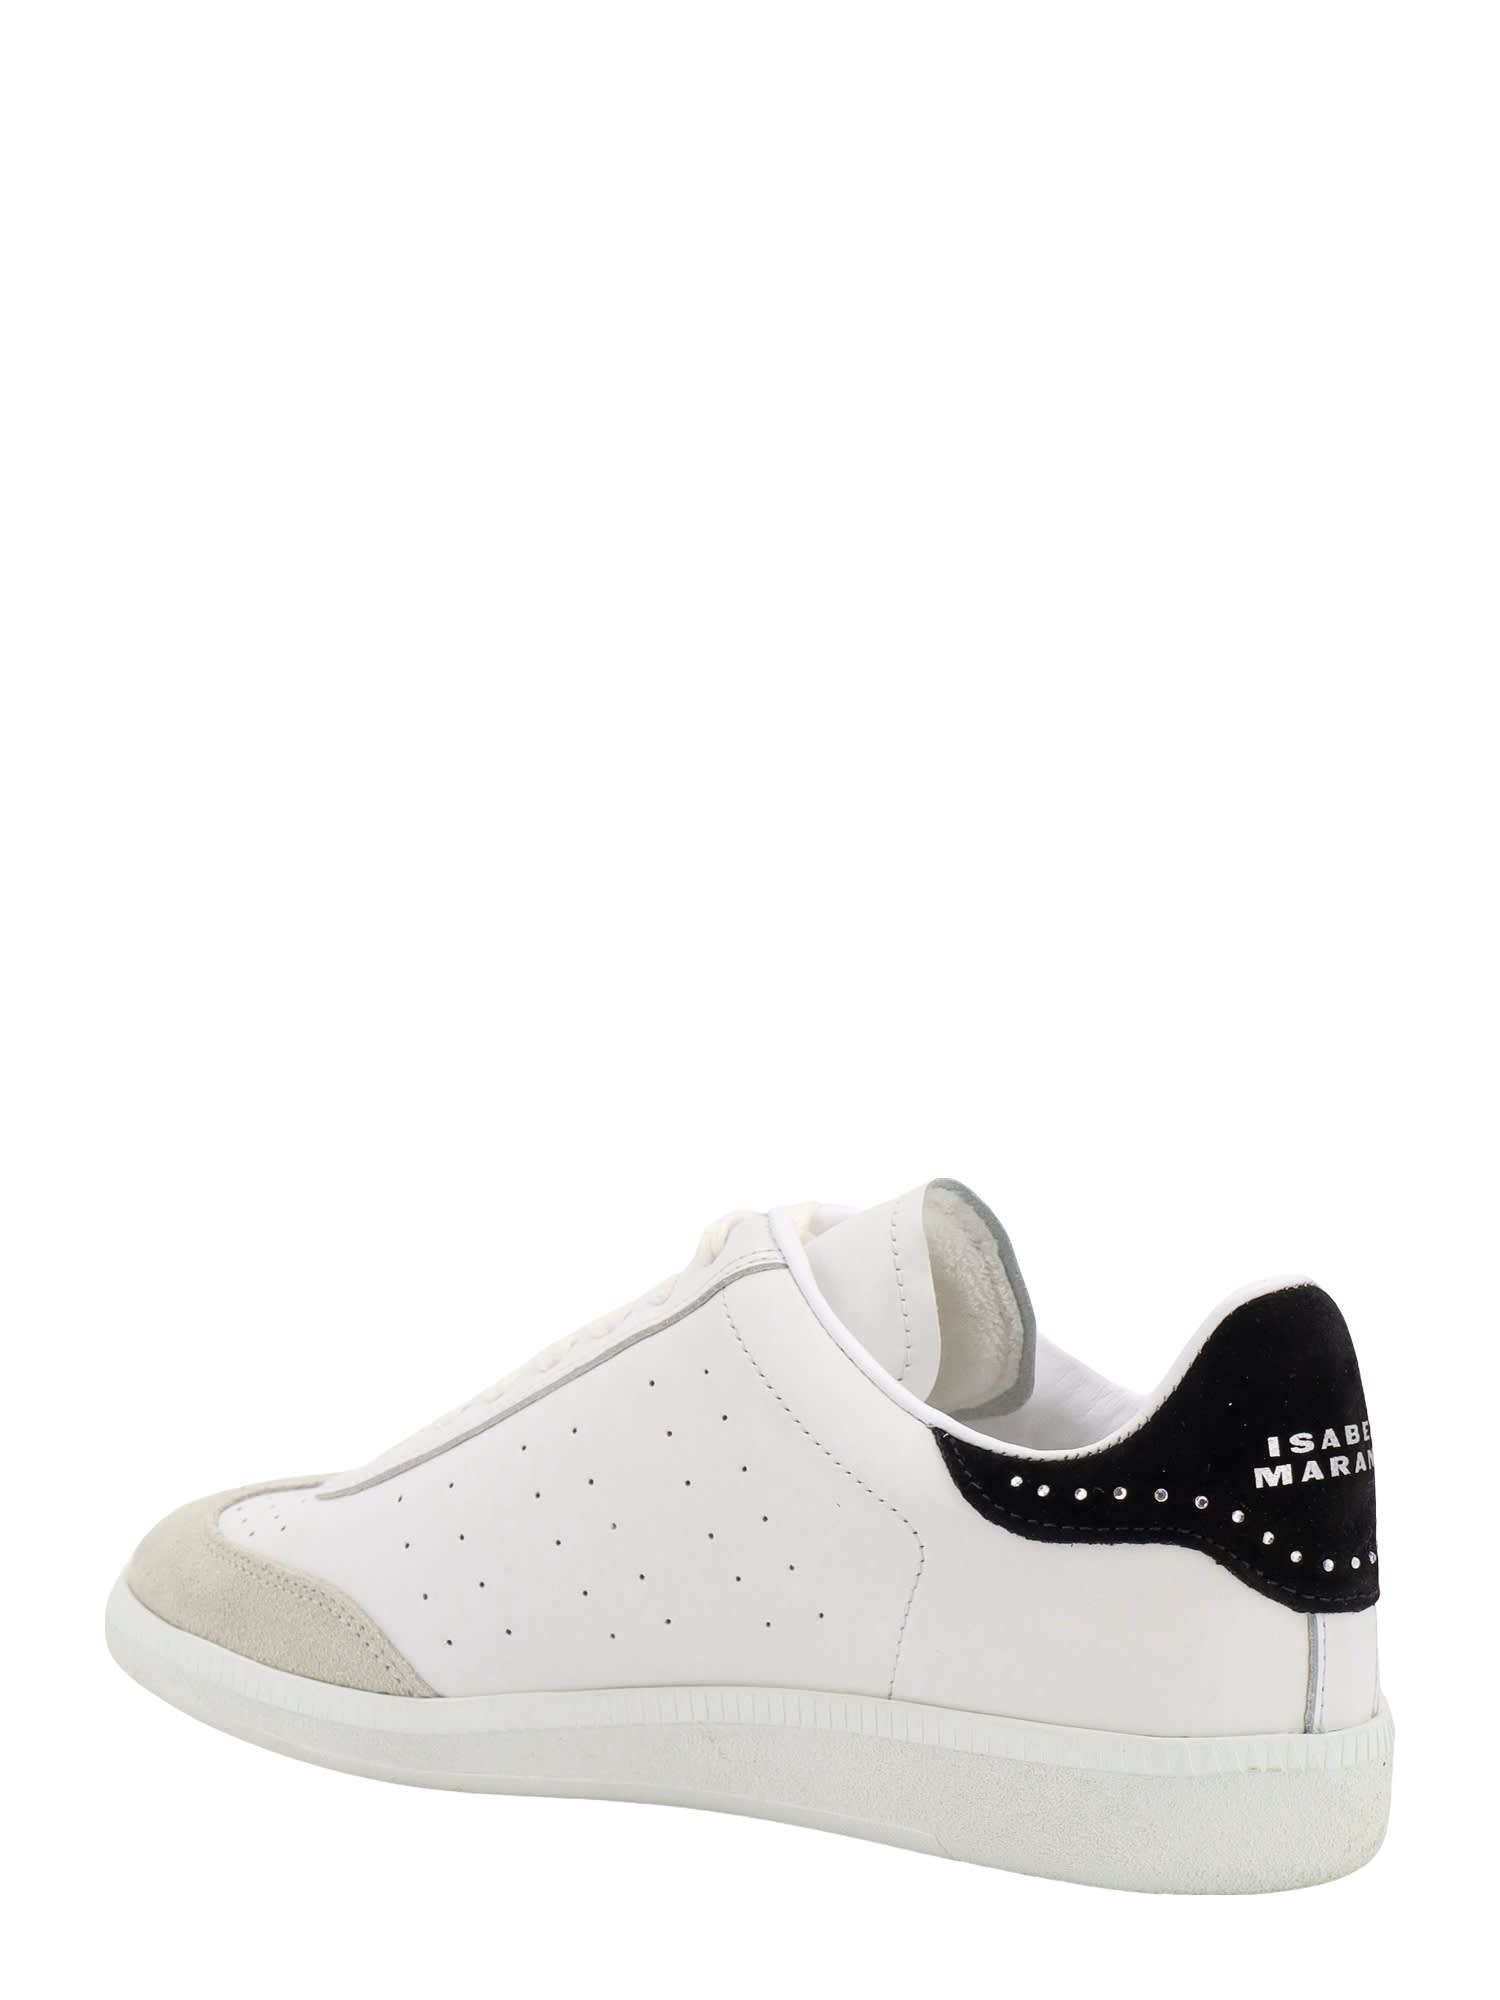 Shop Isabel Marant Sneakers In Whb White Black